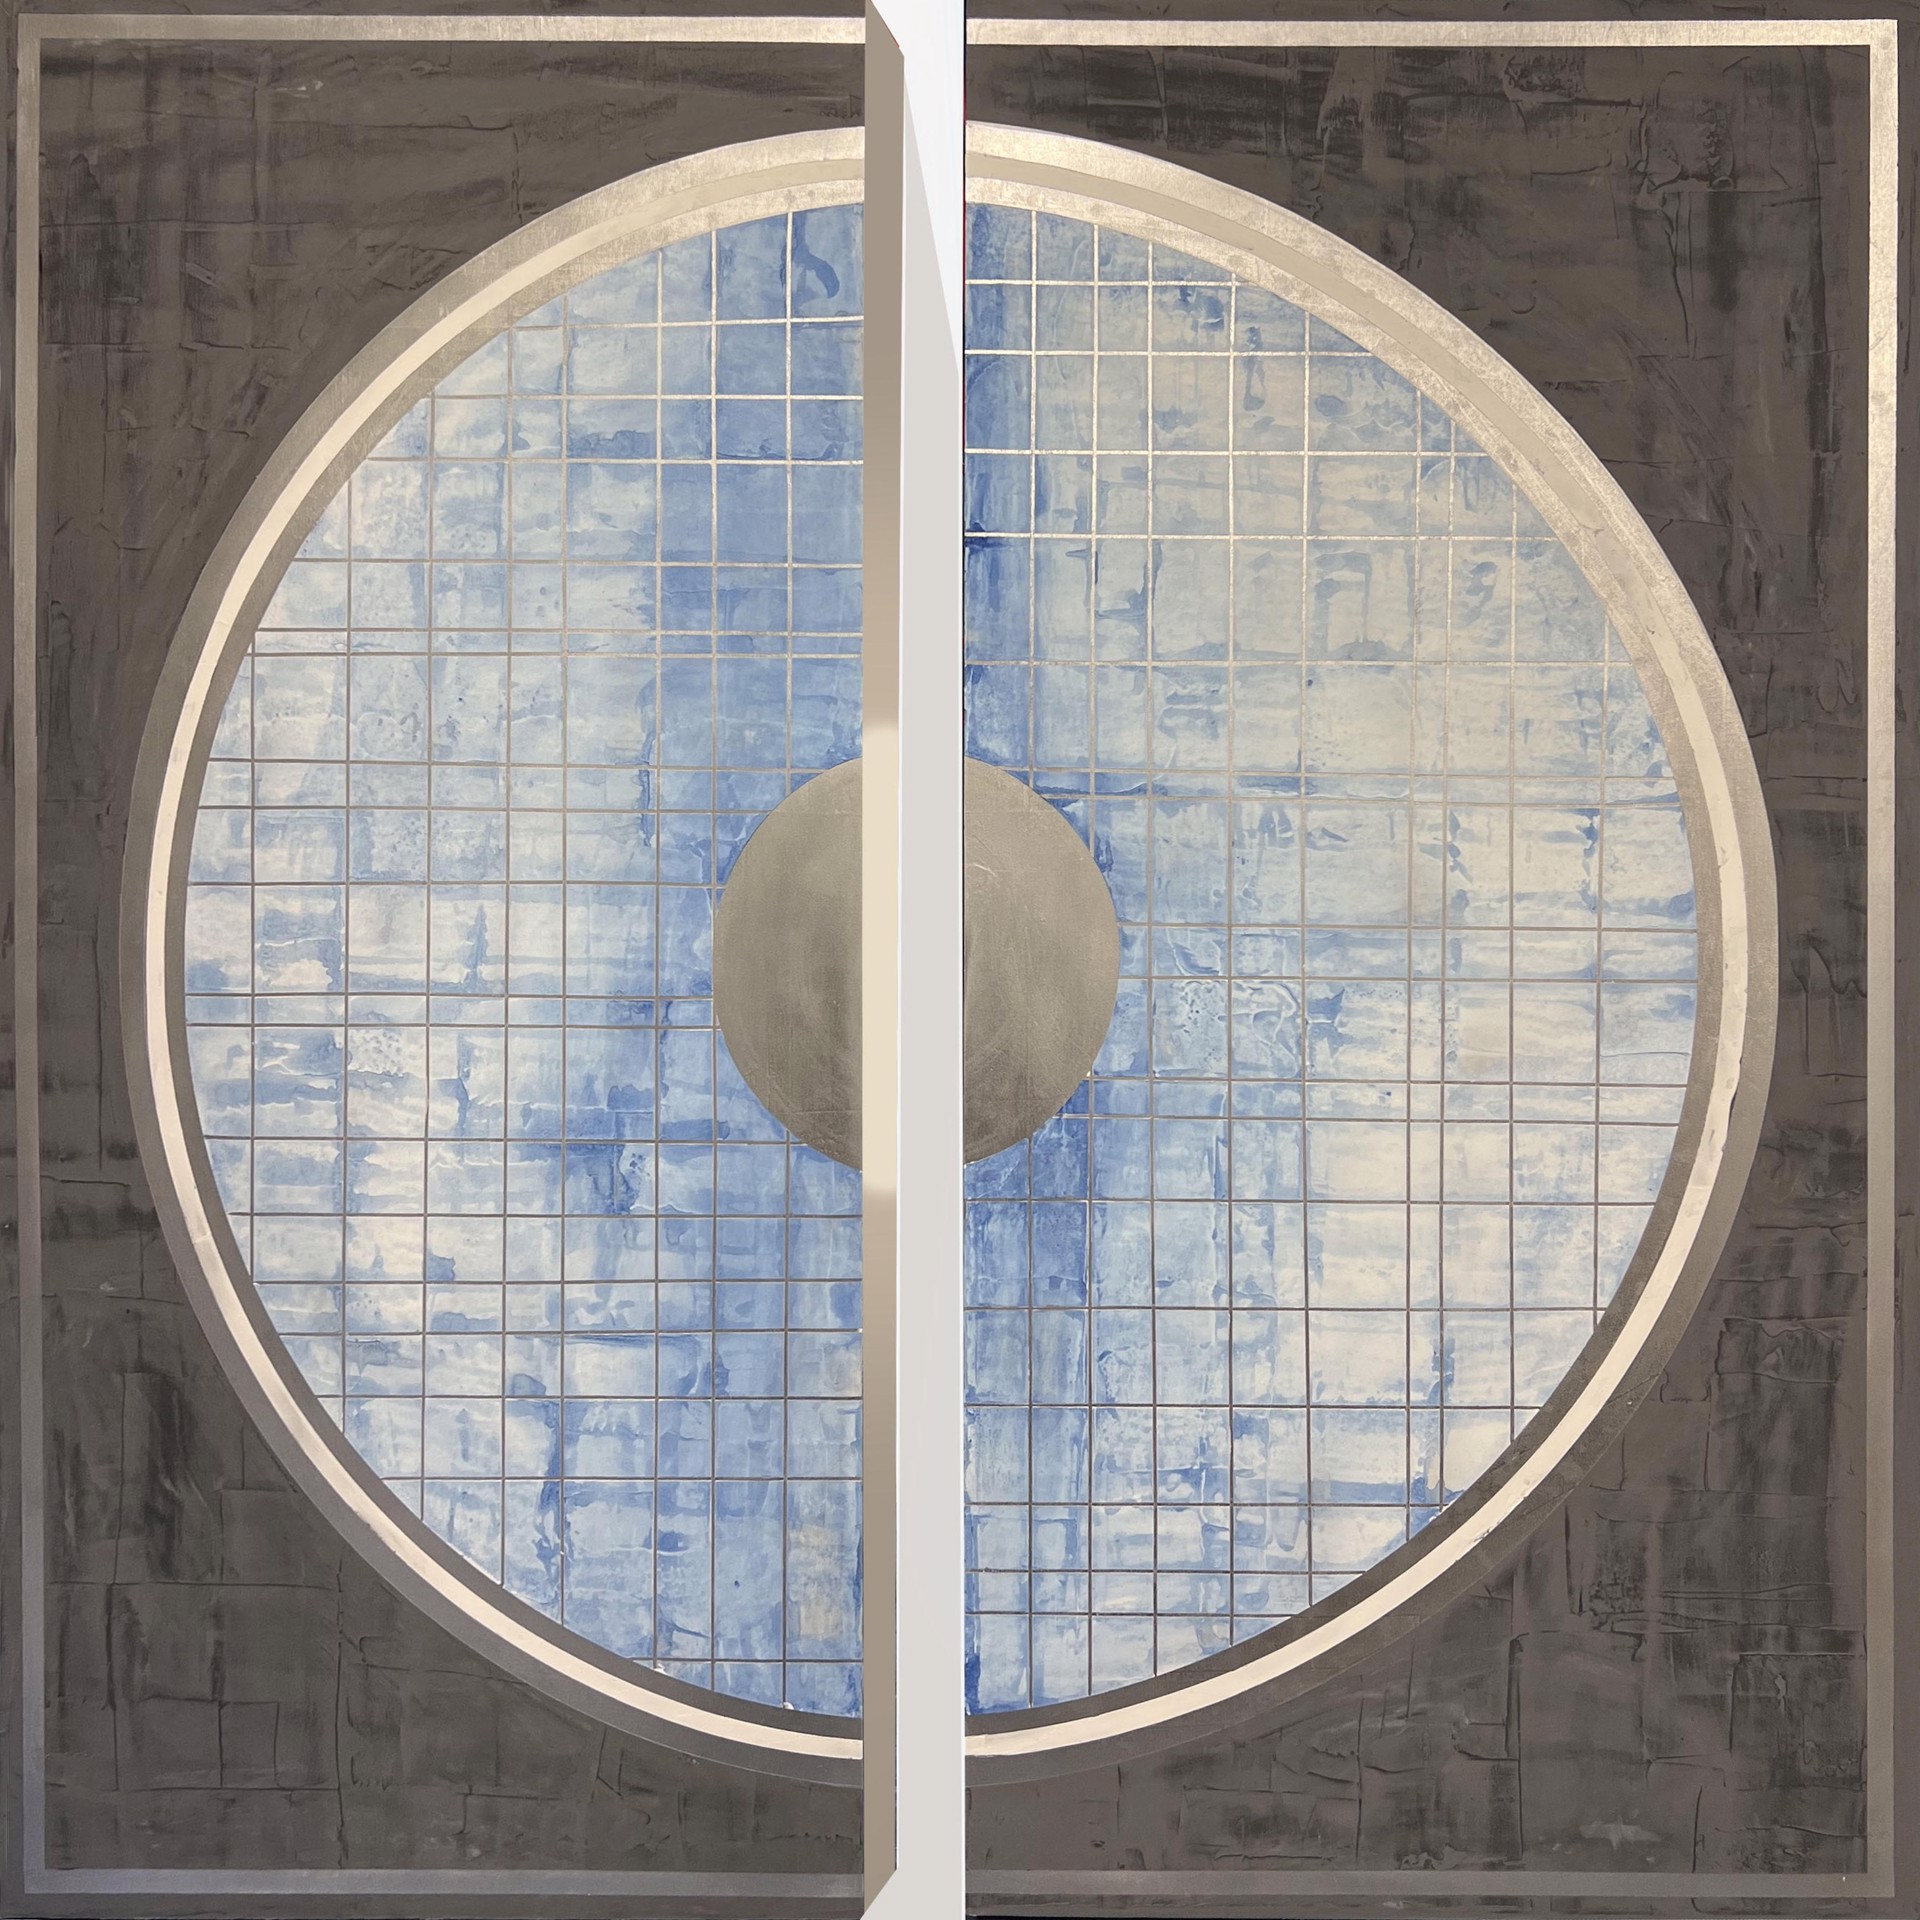 California artist and painter Stephanie Paige's 60"H x 60"W painting Quietude is a beautiful diptych made of two wood panels with layers of grey marble plaster paint and features a quilted textured circle with whites and blues.